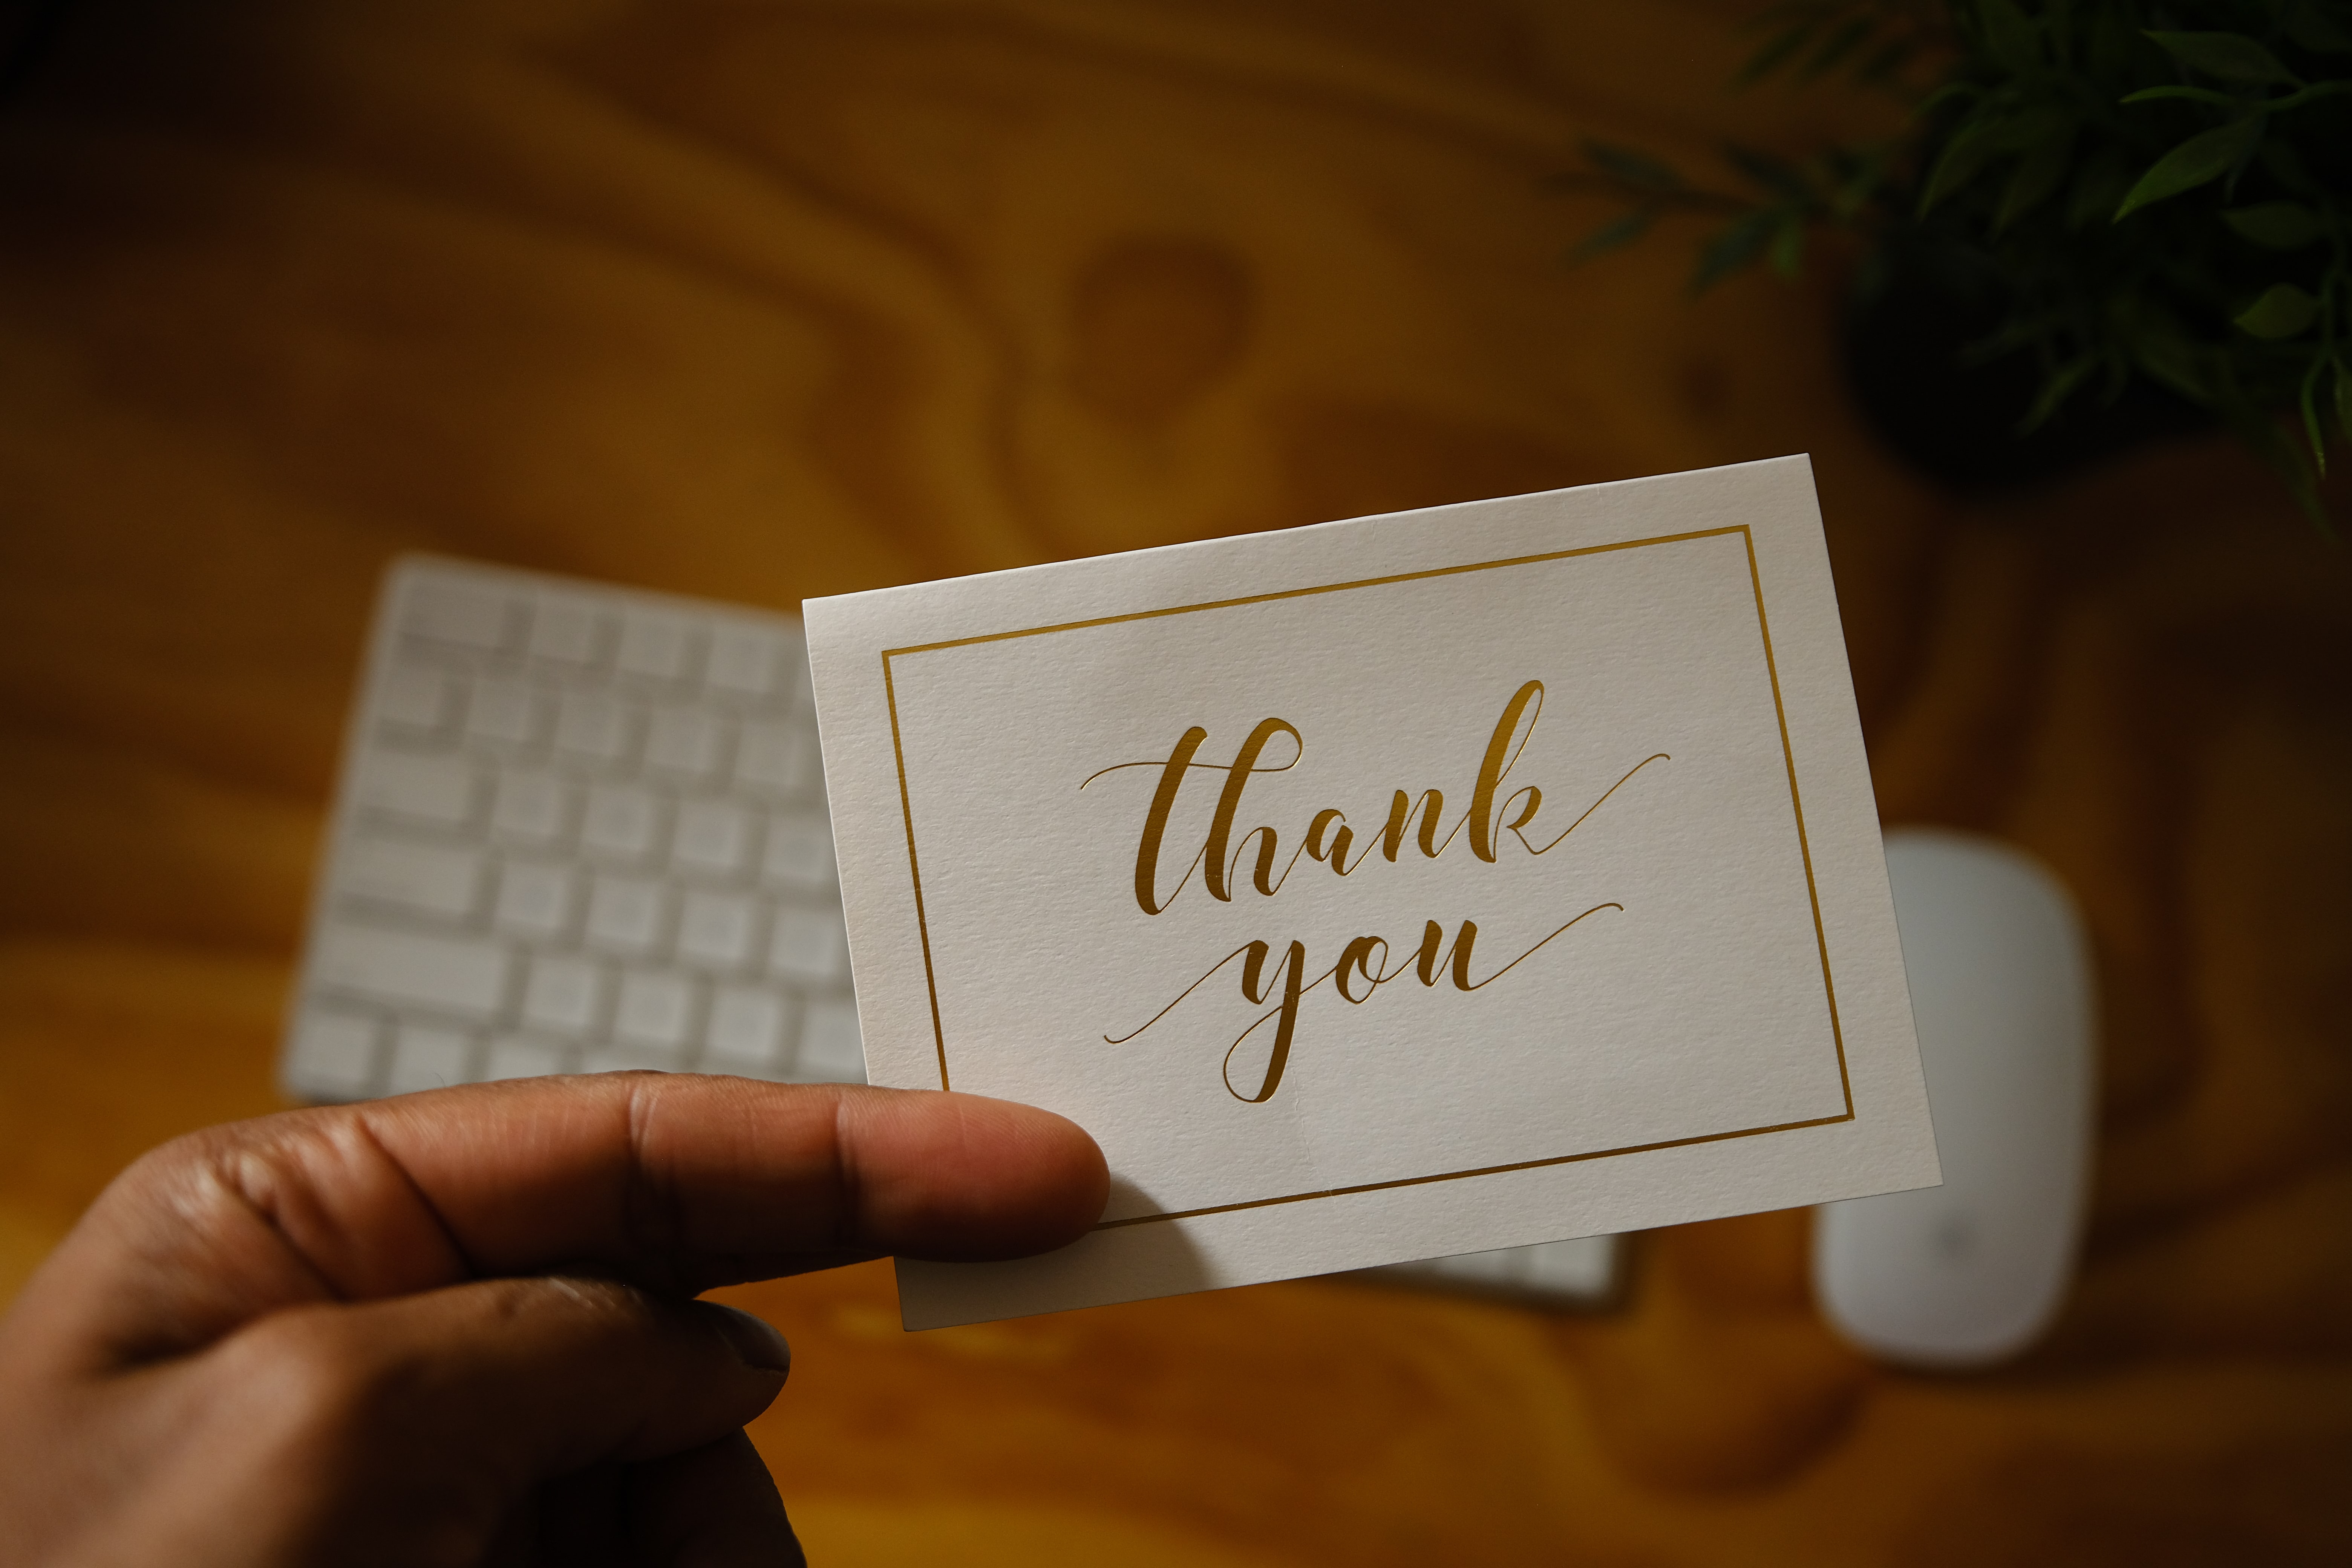 A white card with a gold border, with "thank you" written on the front